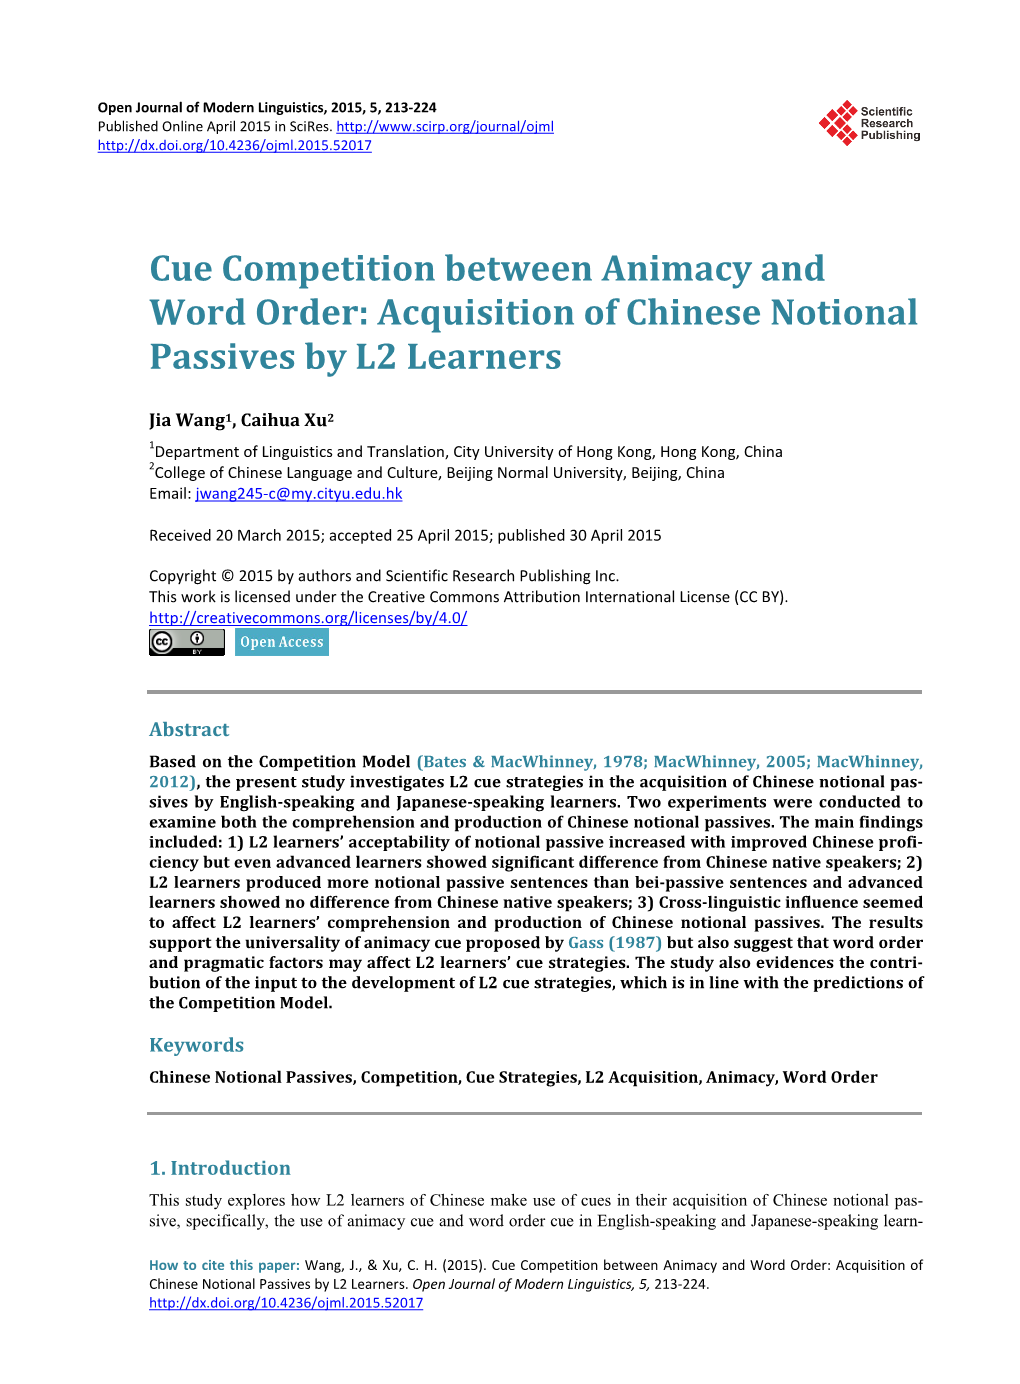 Cue Competition Between Animacy and Word Order: Acquisition of Chinese Notional Passives by L2 Learners